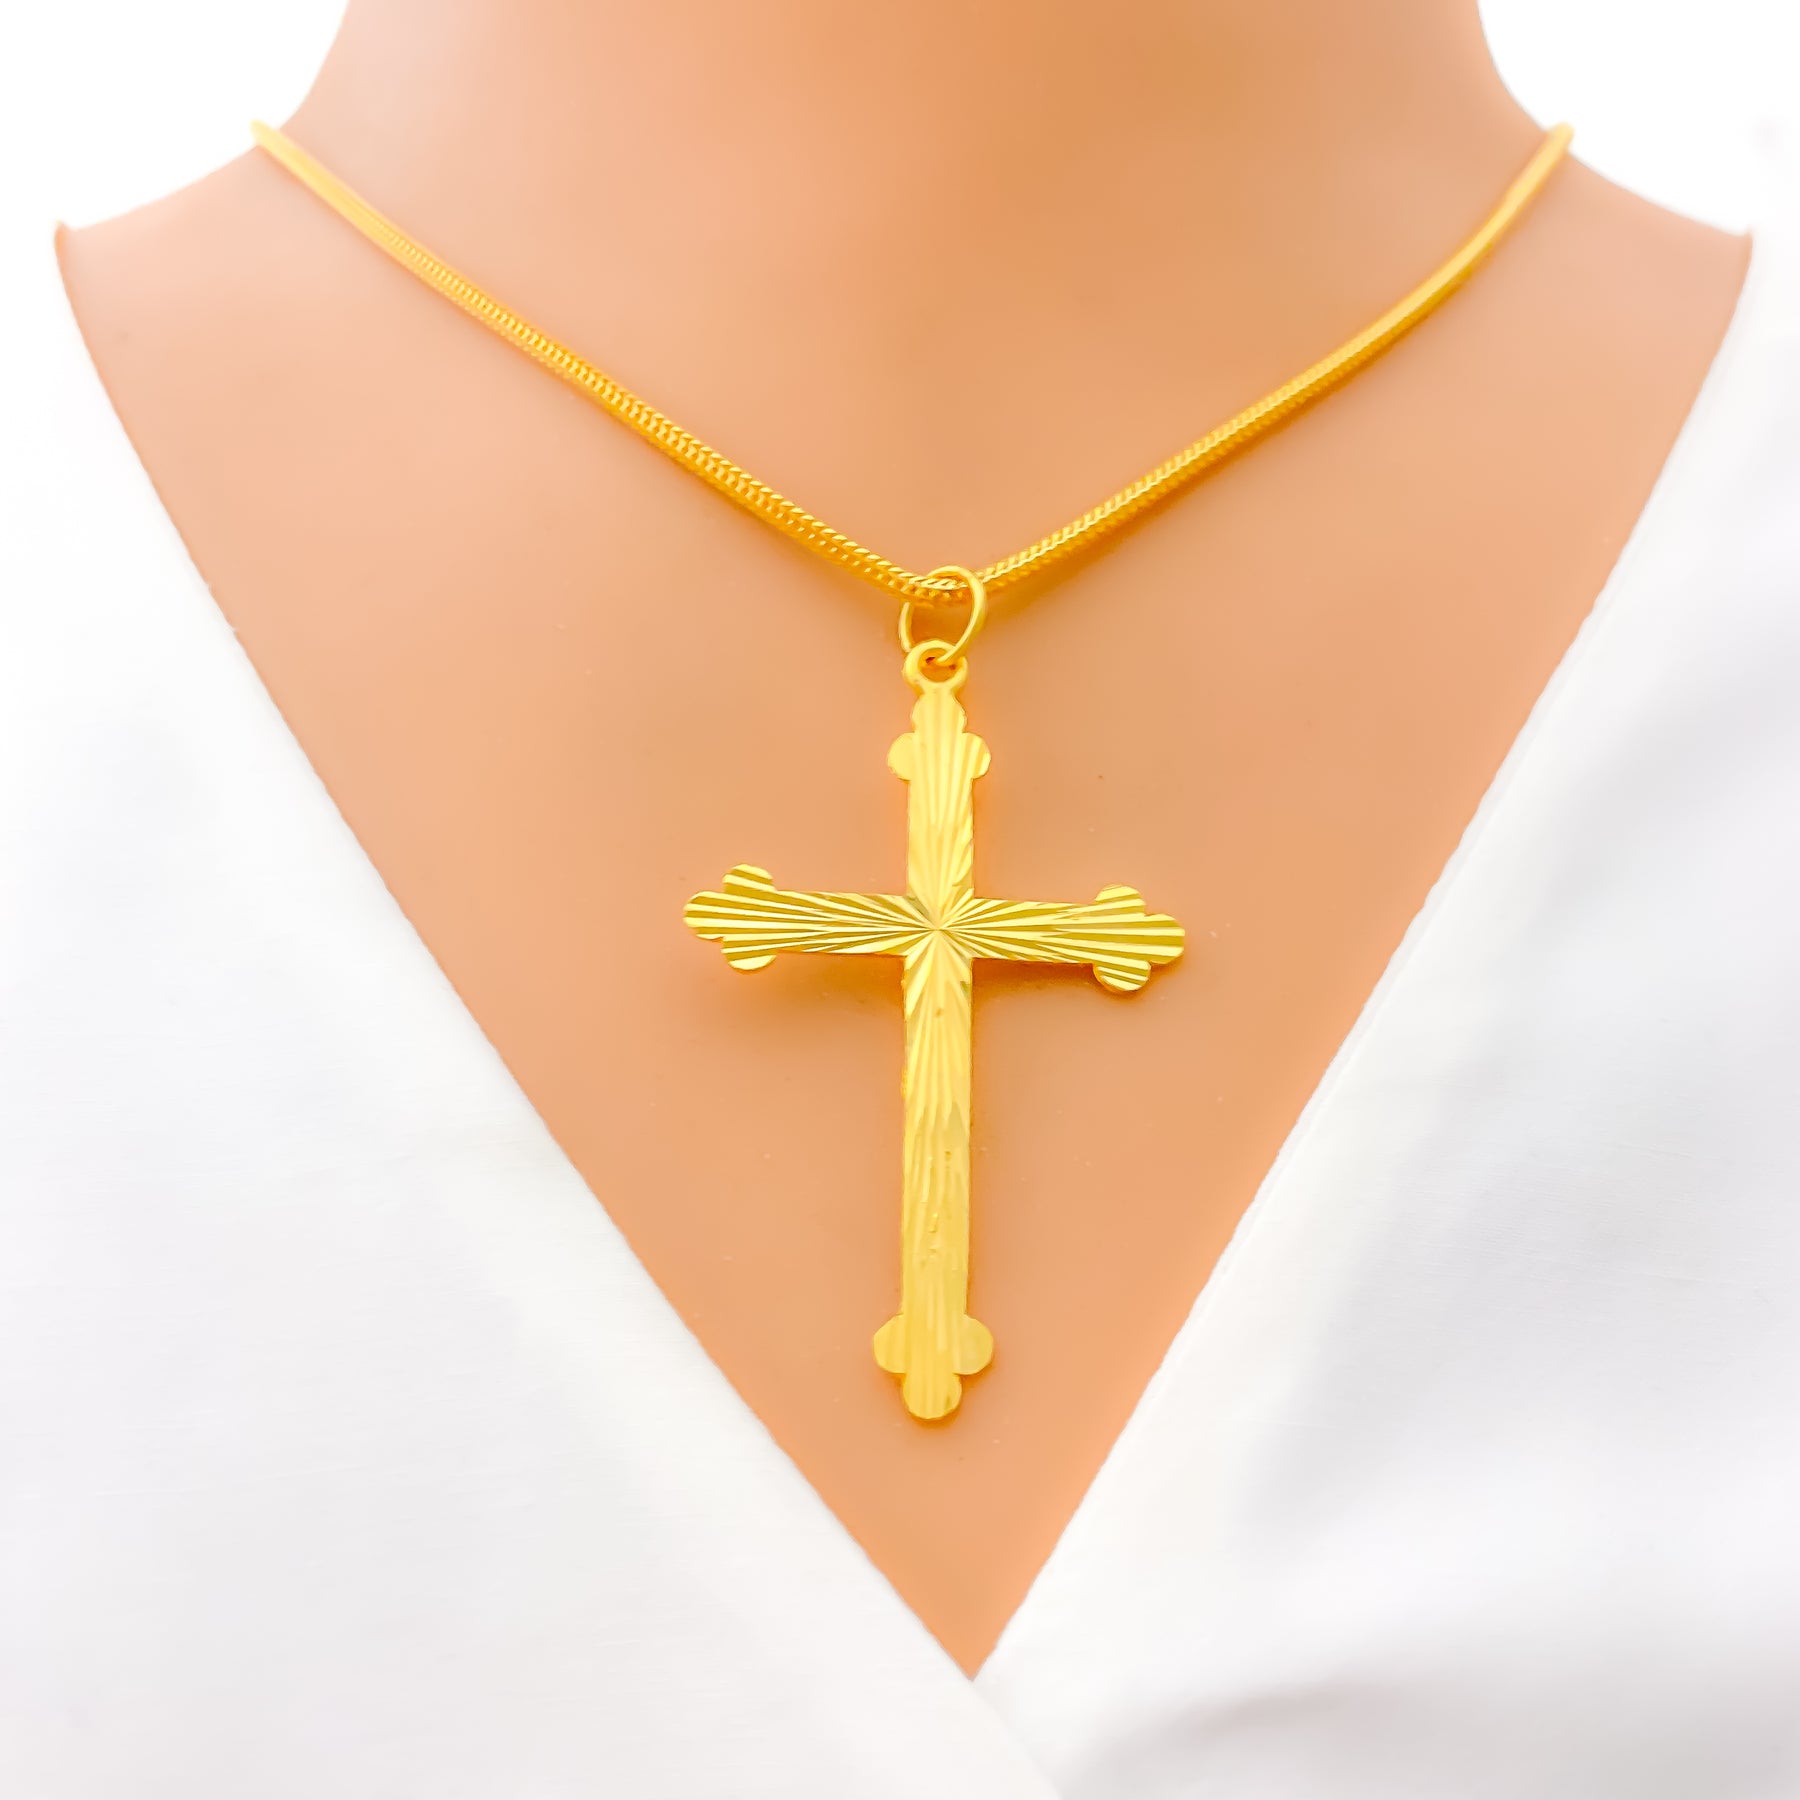 Buy Vintage 24K 9999 Pure Gold Crucifix Cross Pendant. Online in India -  Etsy